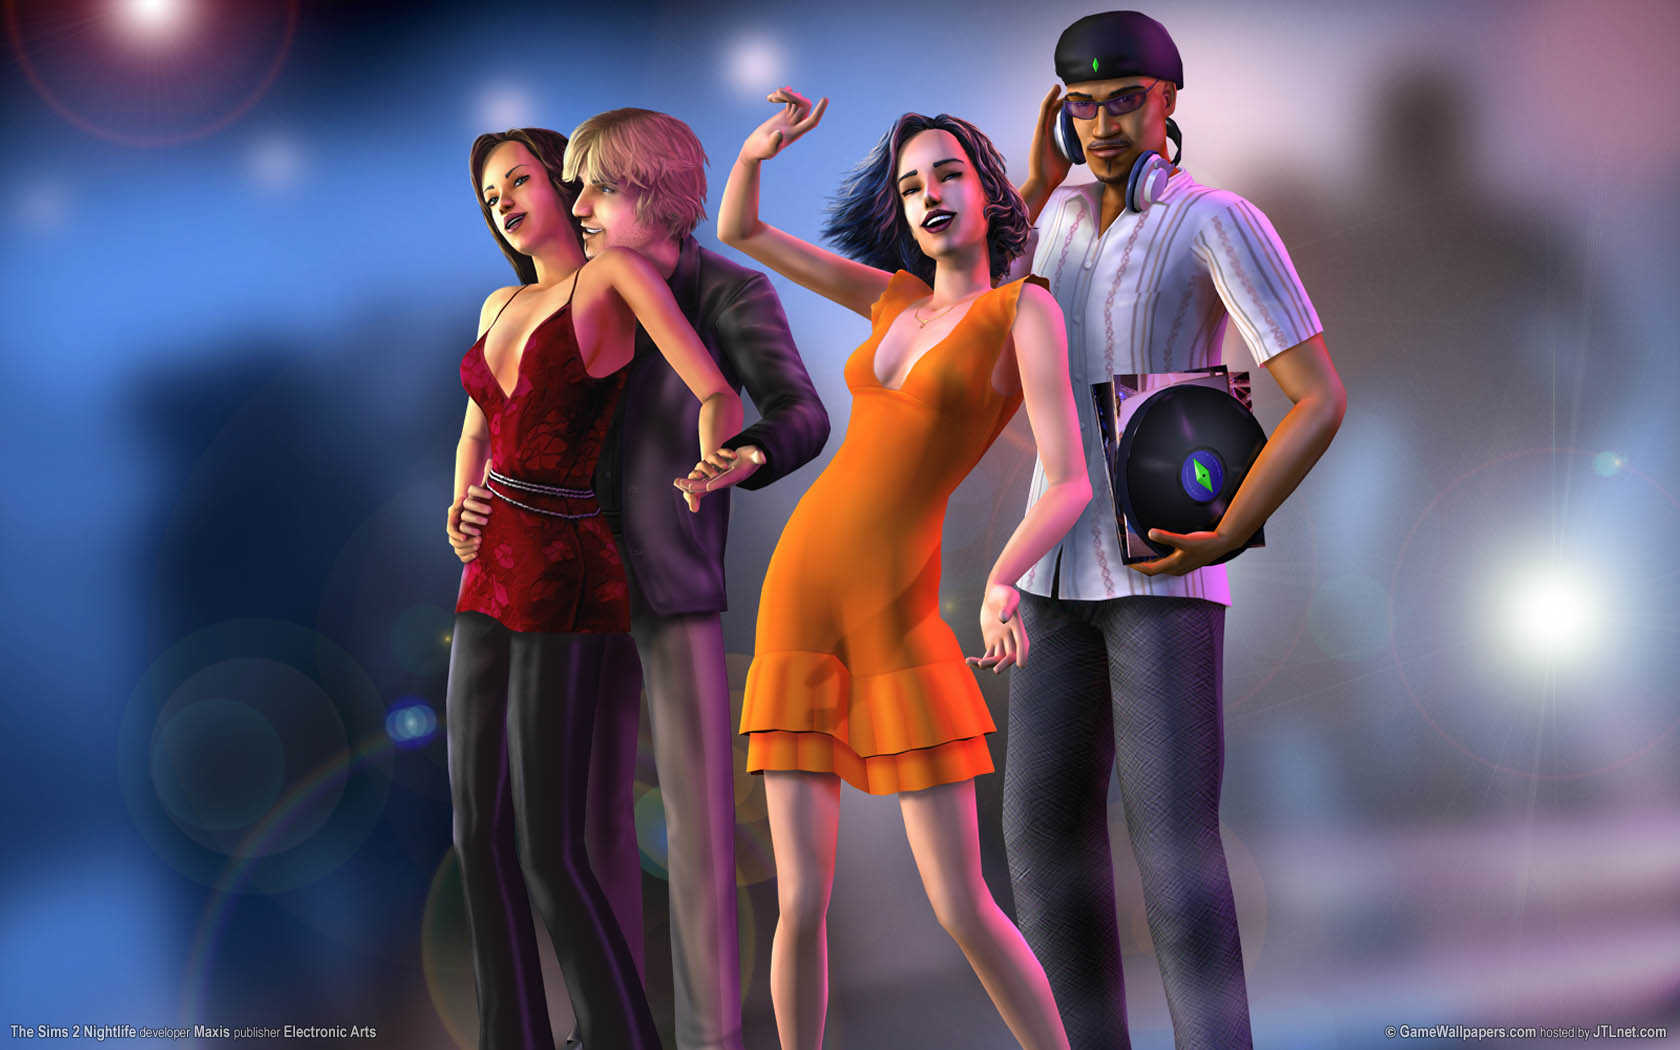 The Sims 2 Nightlife wallpaper 05 1680x1050